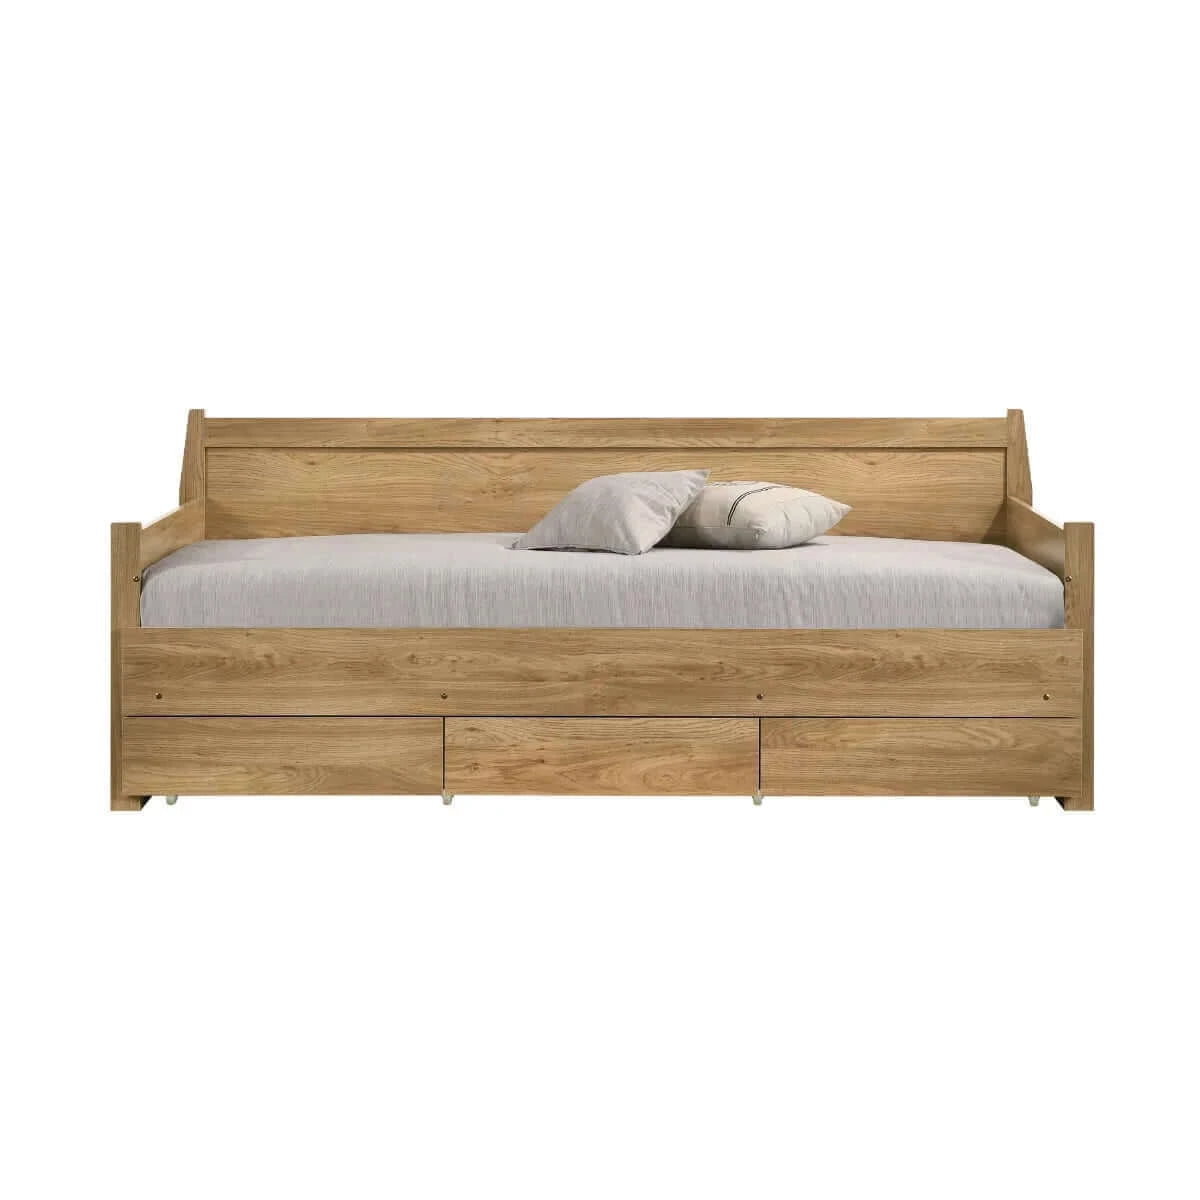 Buy mica natural wooden day bed with 3 drawers sofa bed frame - upinteriors-Upinteriors